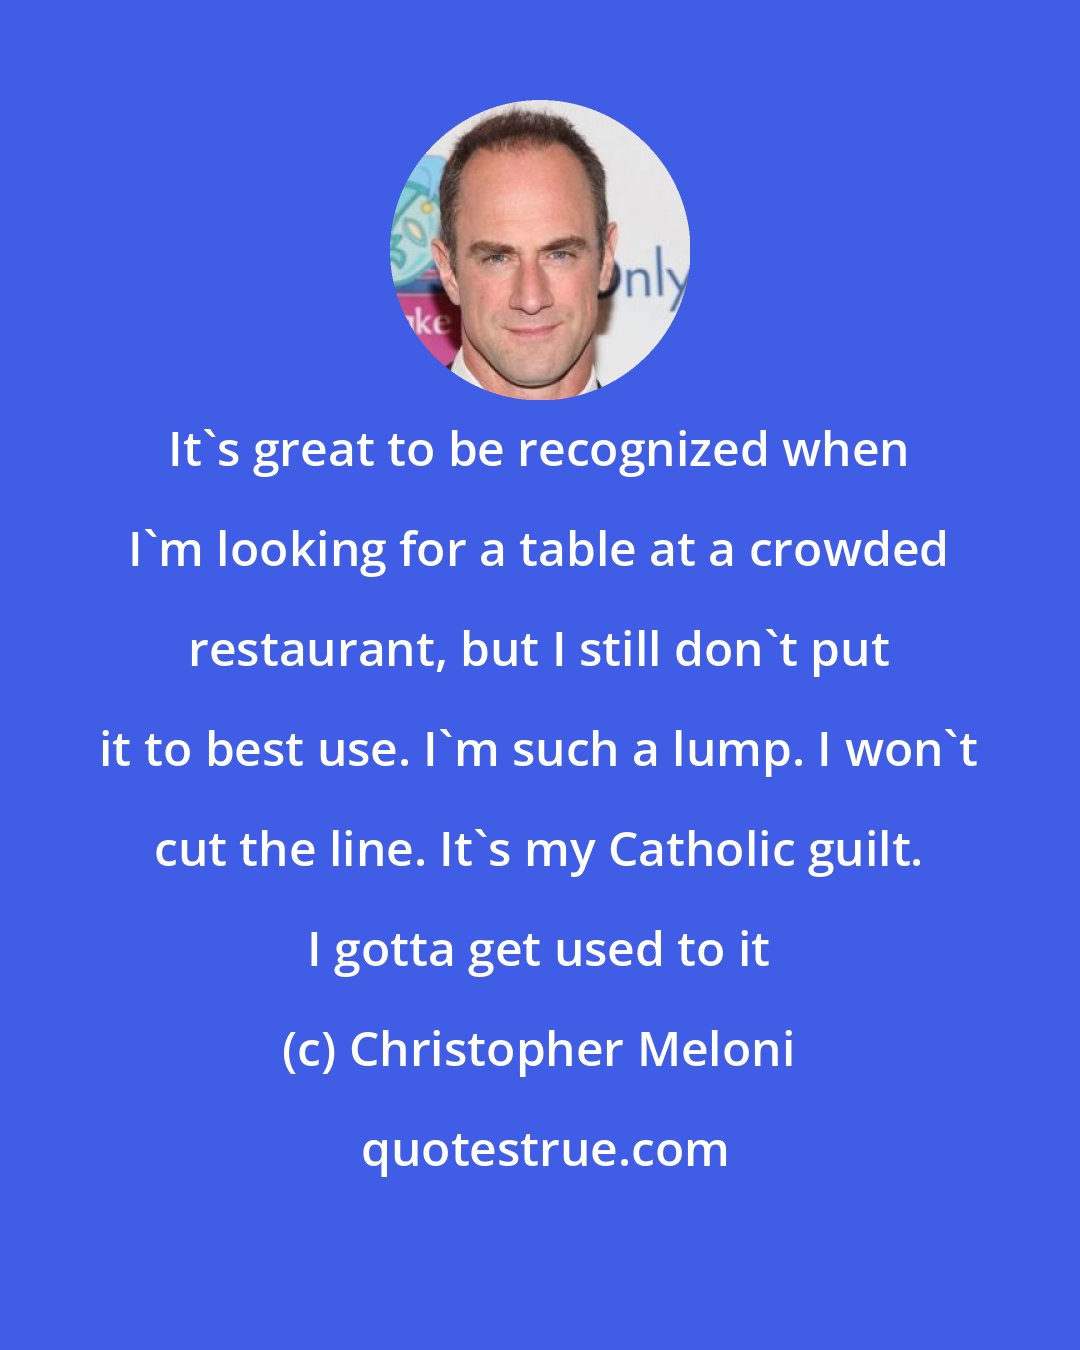 Christopher Meloni: It's great to be recognized when I'm looking for a table at a crowded restaurant, but I still don't put it to best use. I'm such a lump. I won't cut the line. It's my Catholic guilt. I gotta get used to it